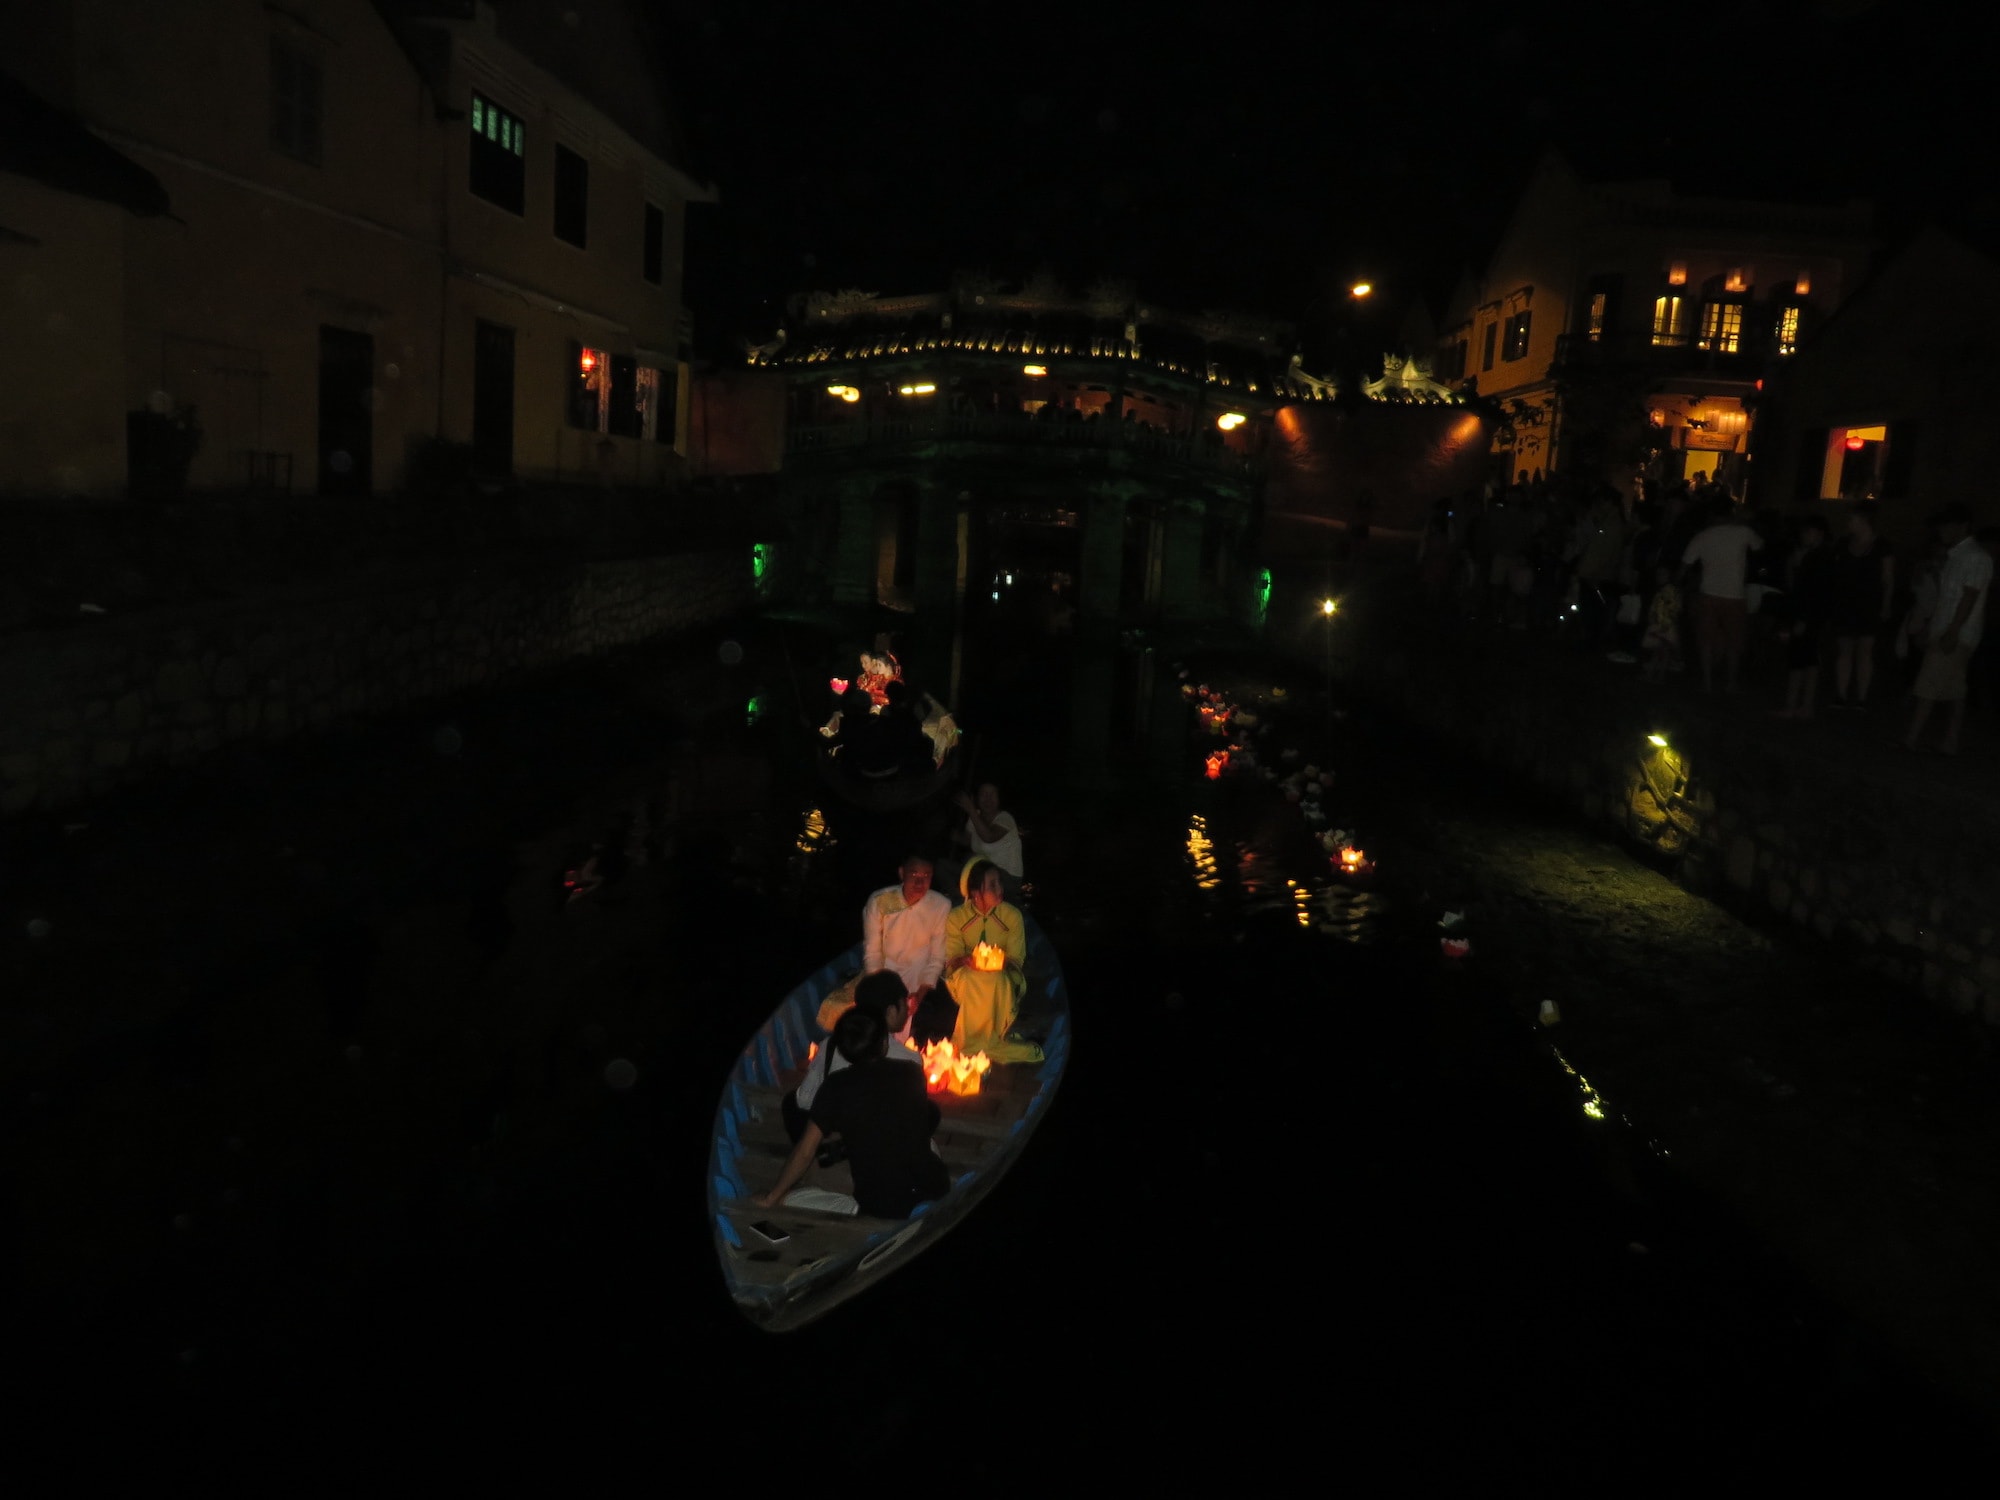 Boats with lanterns lit up at night in Hoi An